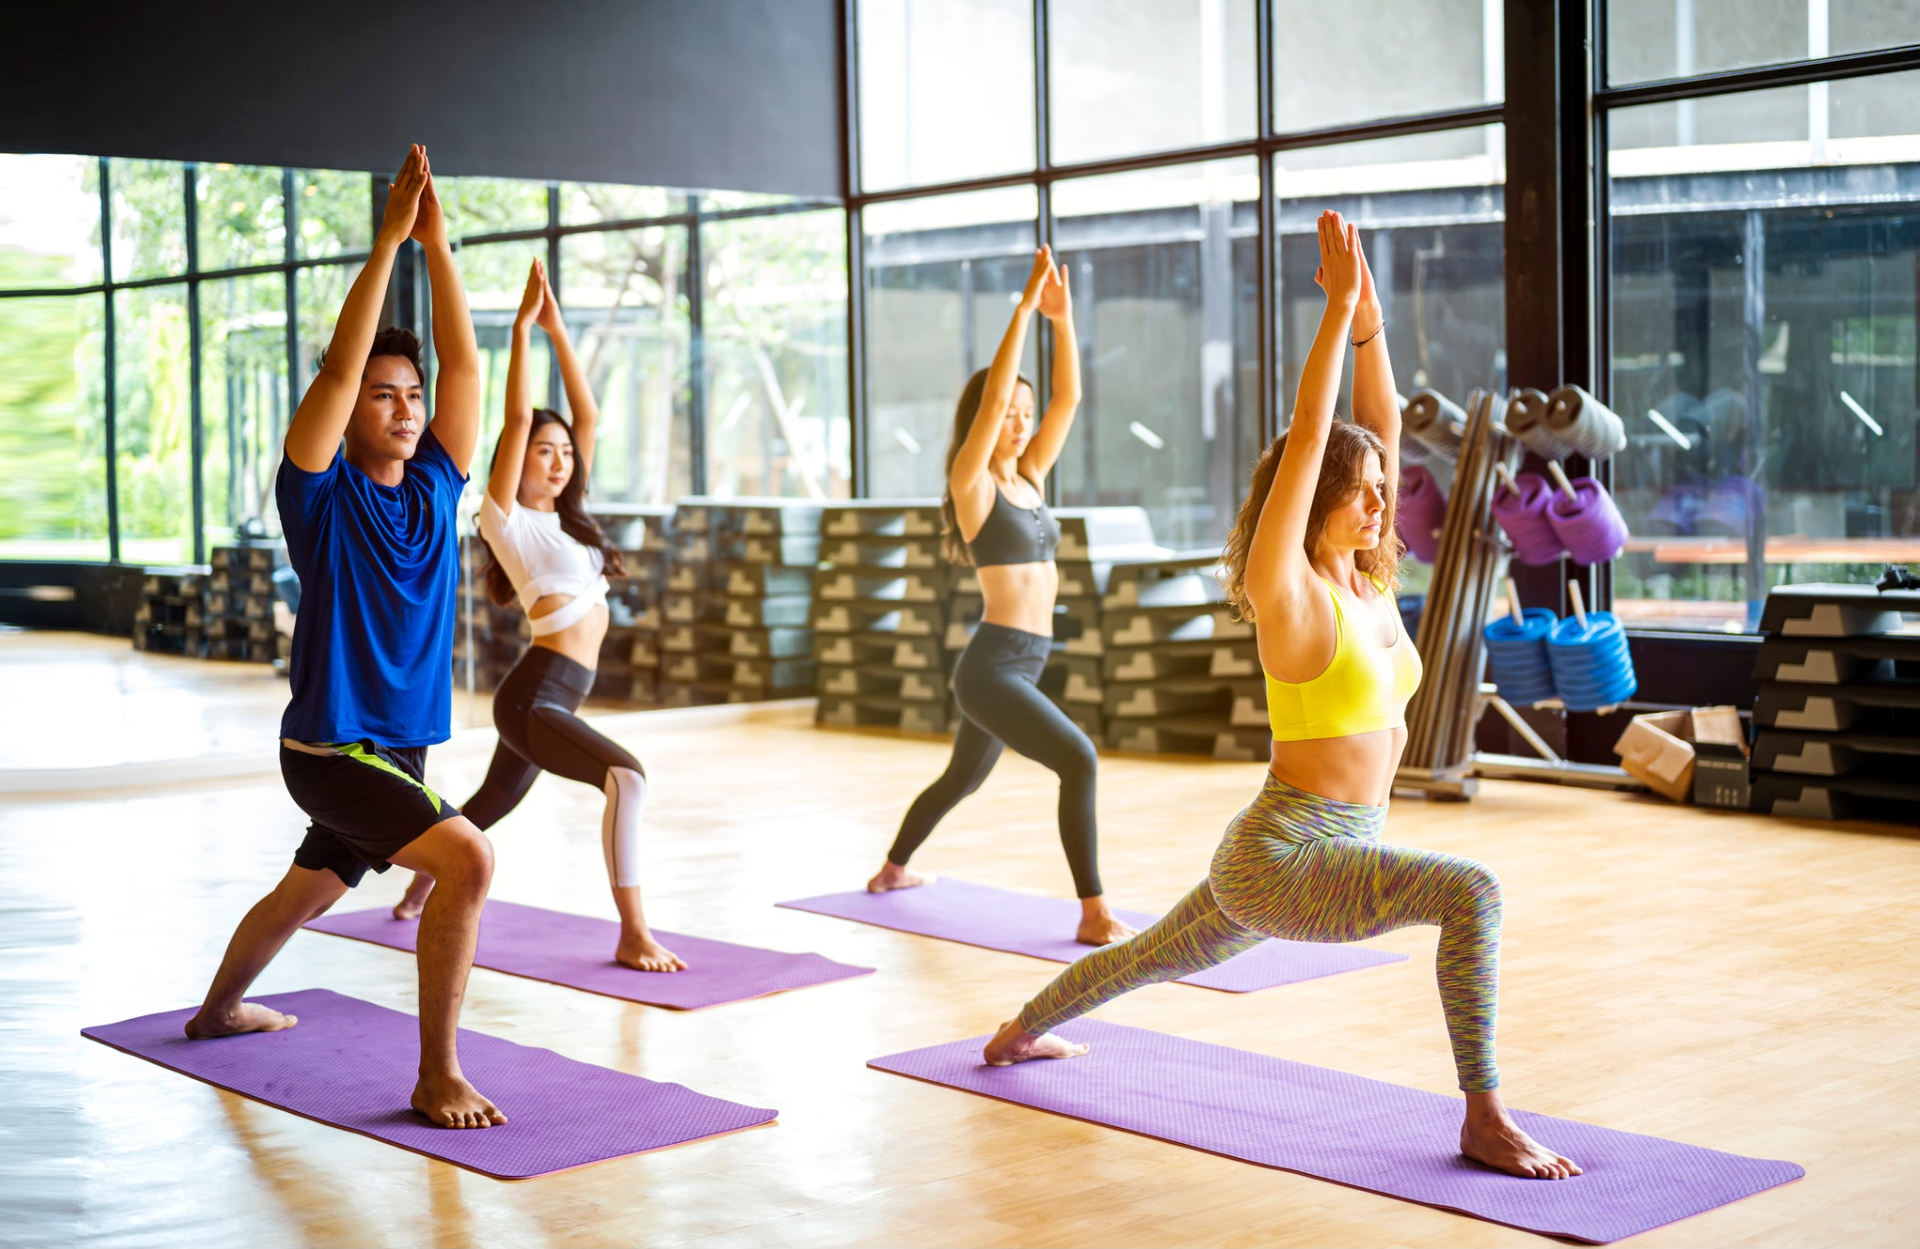 Teachers and students get a 20% education discount at CorePower Yoga.